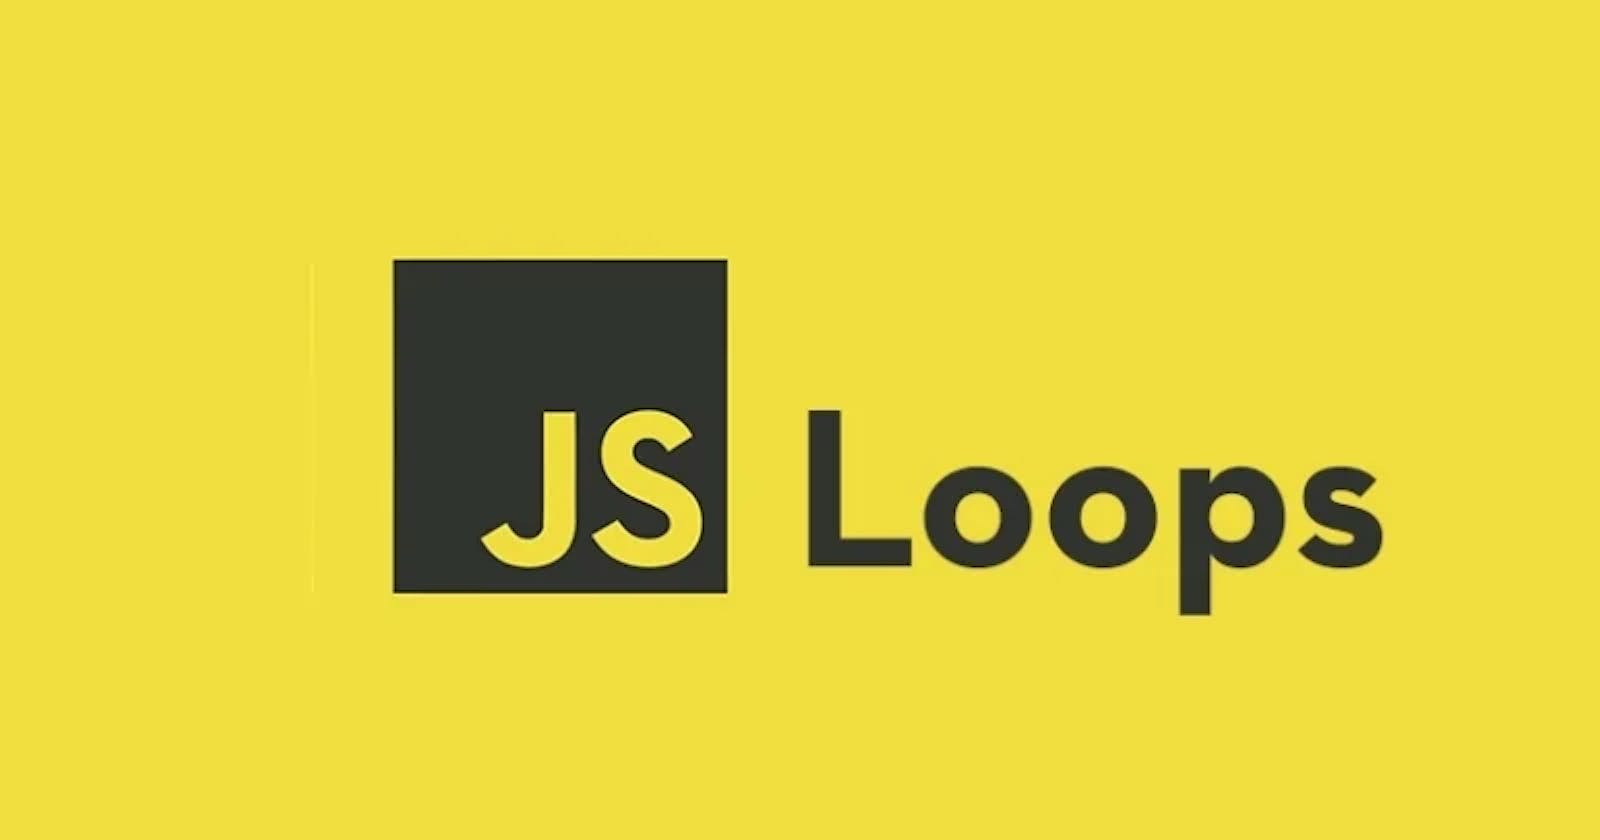 for, forEach , for of and for in loops in JavaScript